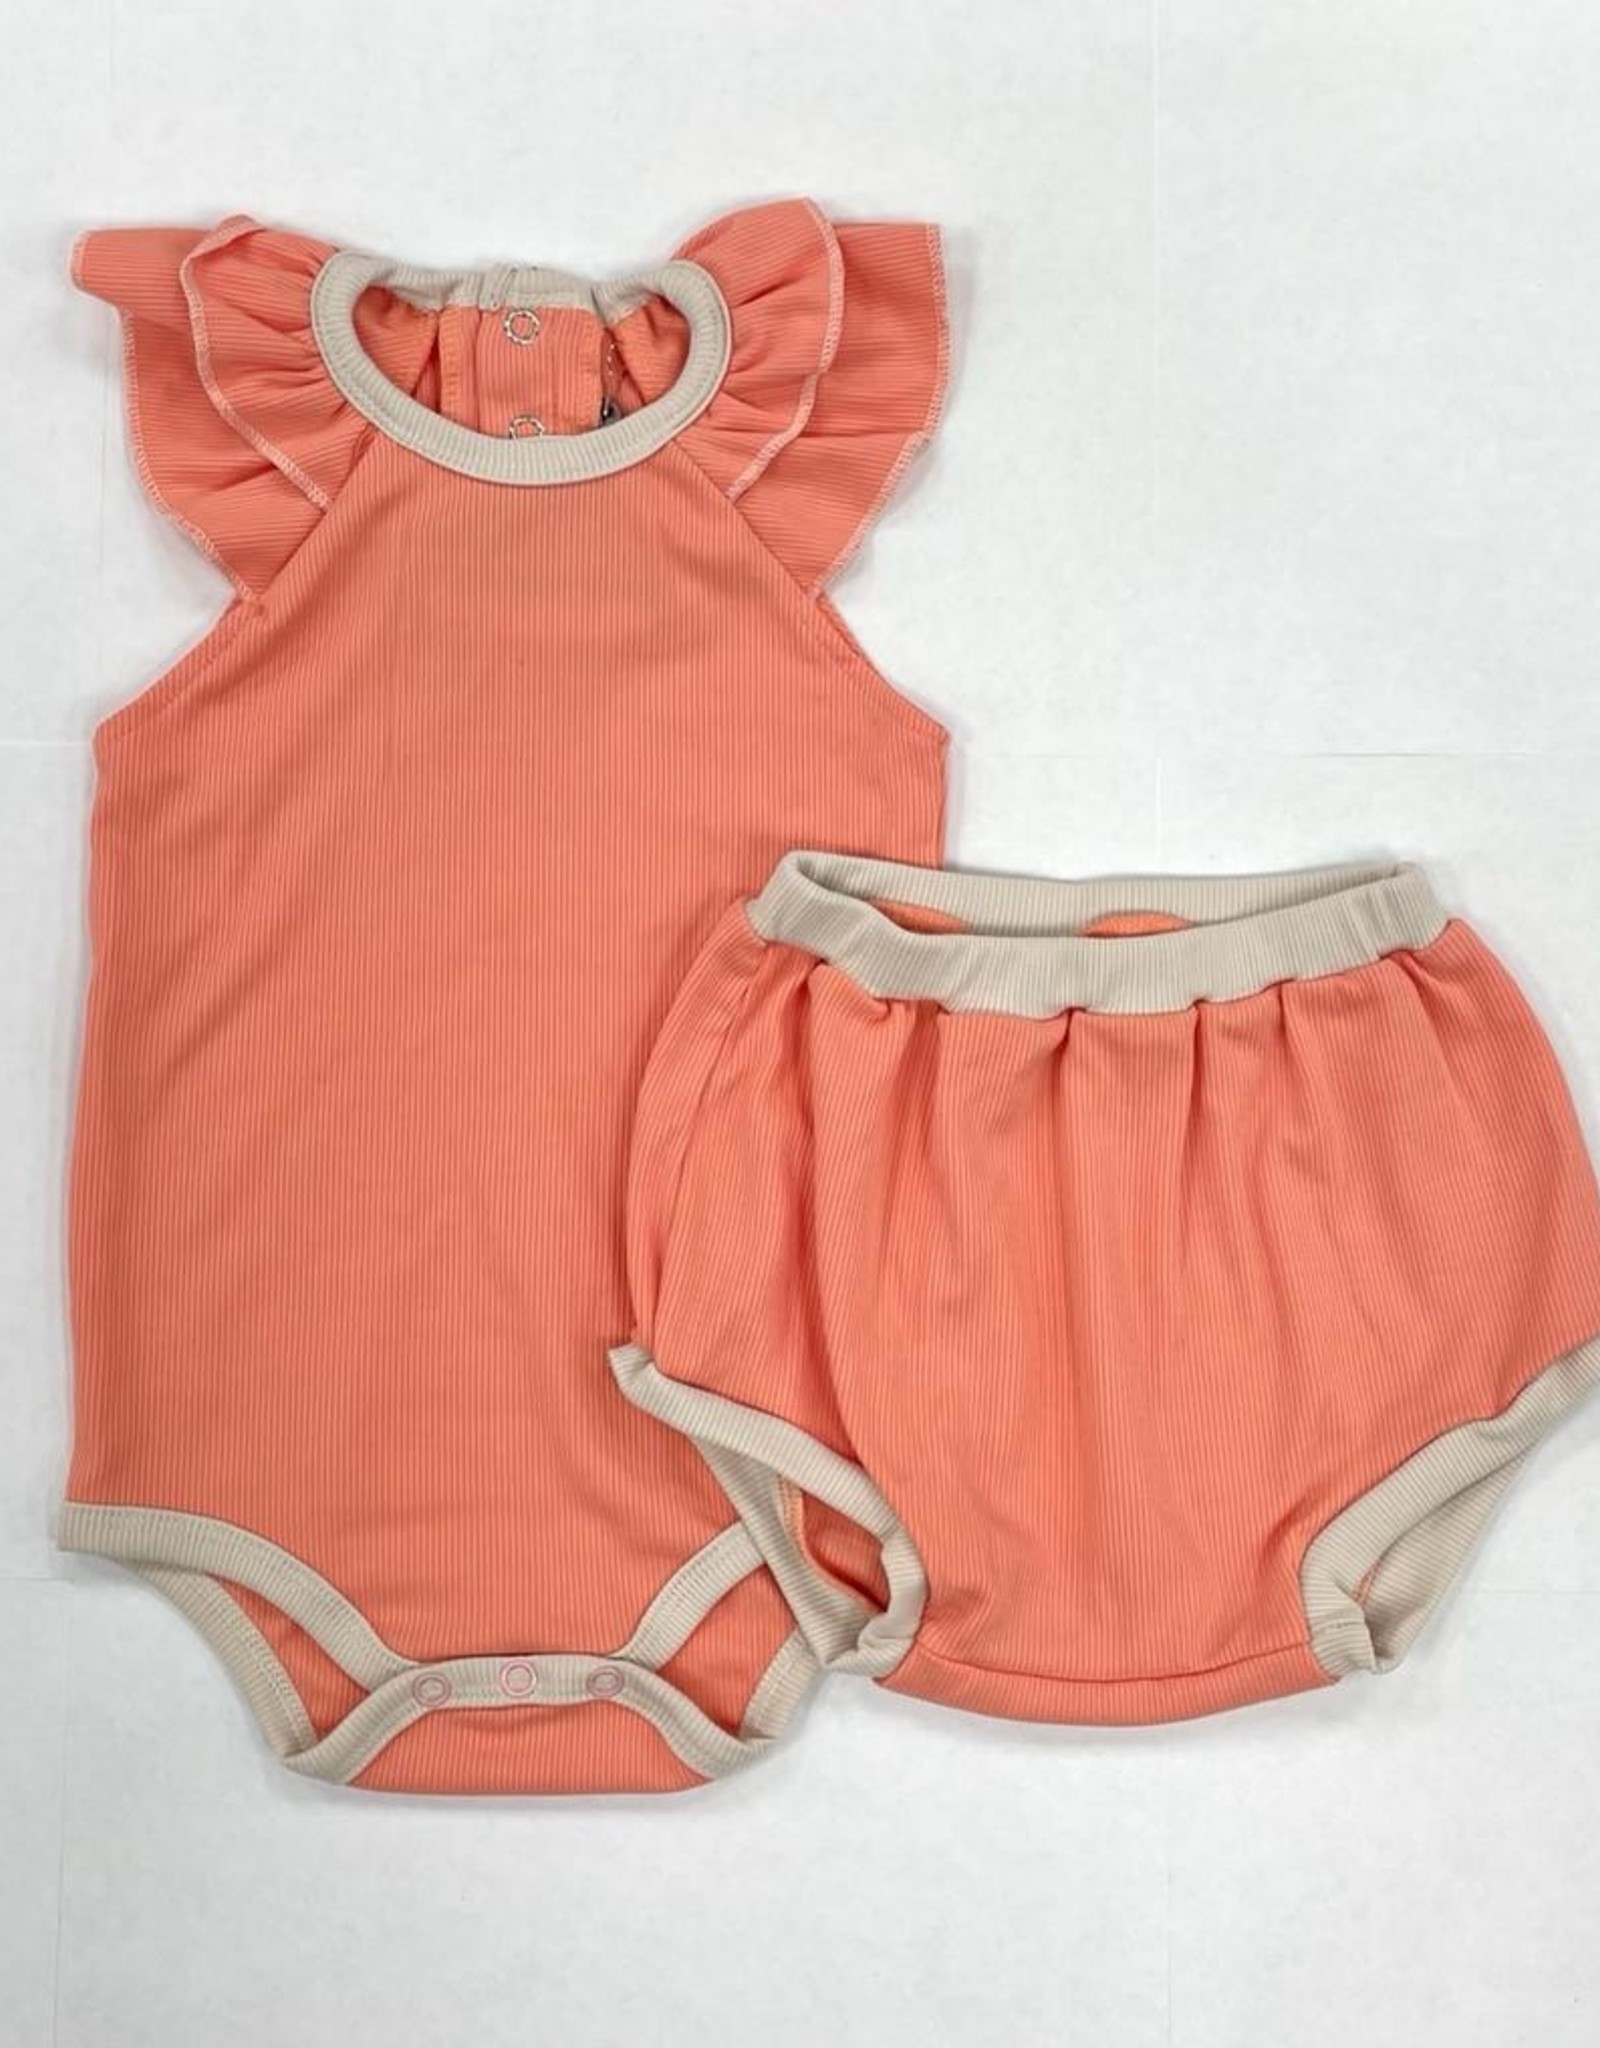 HATCH'd HATCH'd Ribbed 2 Piece Set with Contrast Trim (Tank/Bloomers)